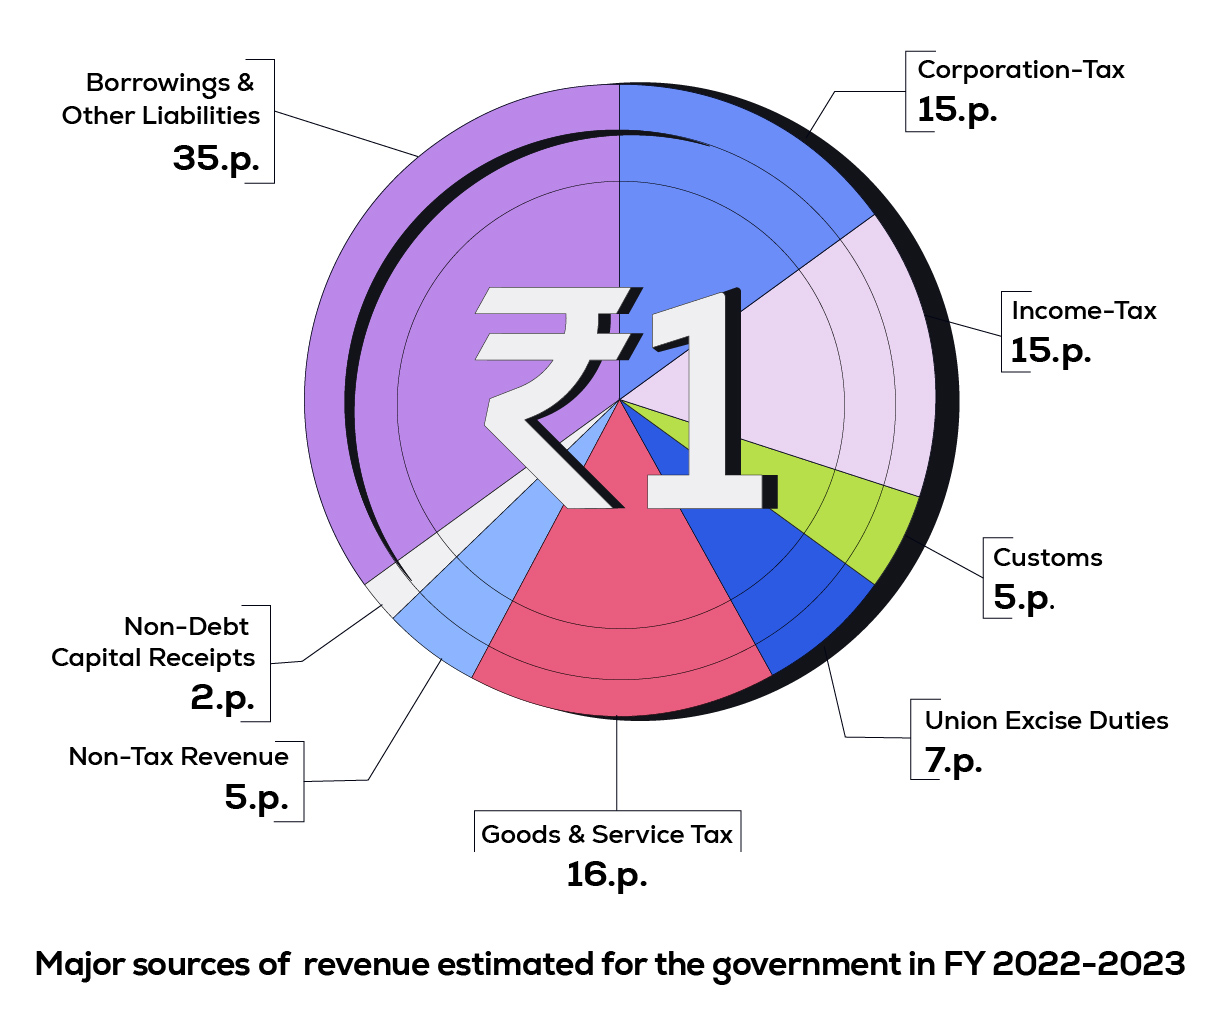 Sources of estimated revenues in FY 2-22 - 2023 GOI